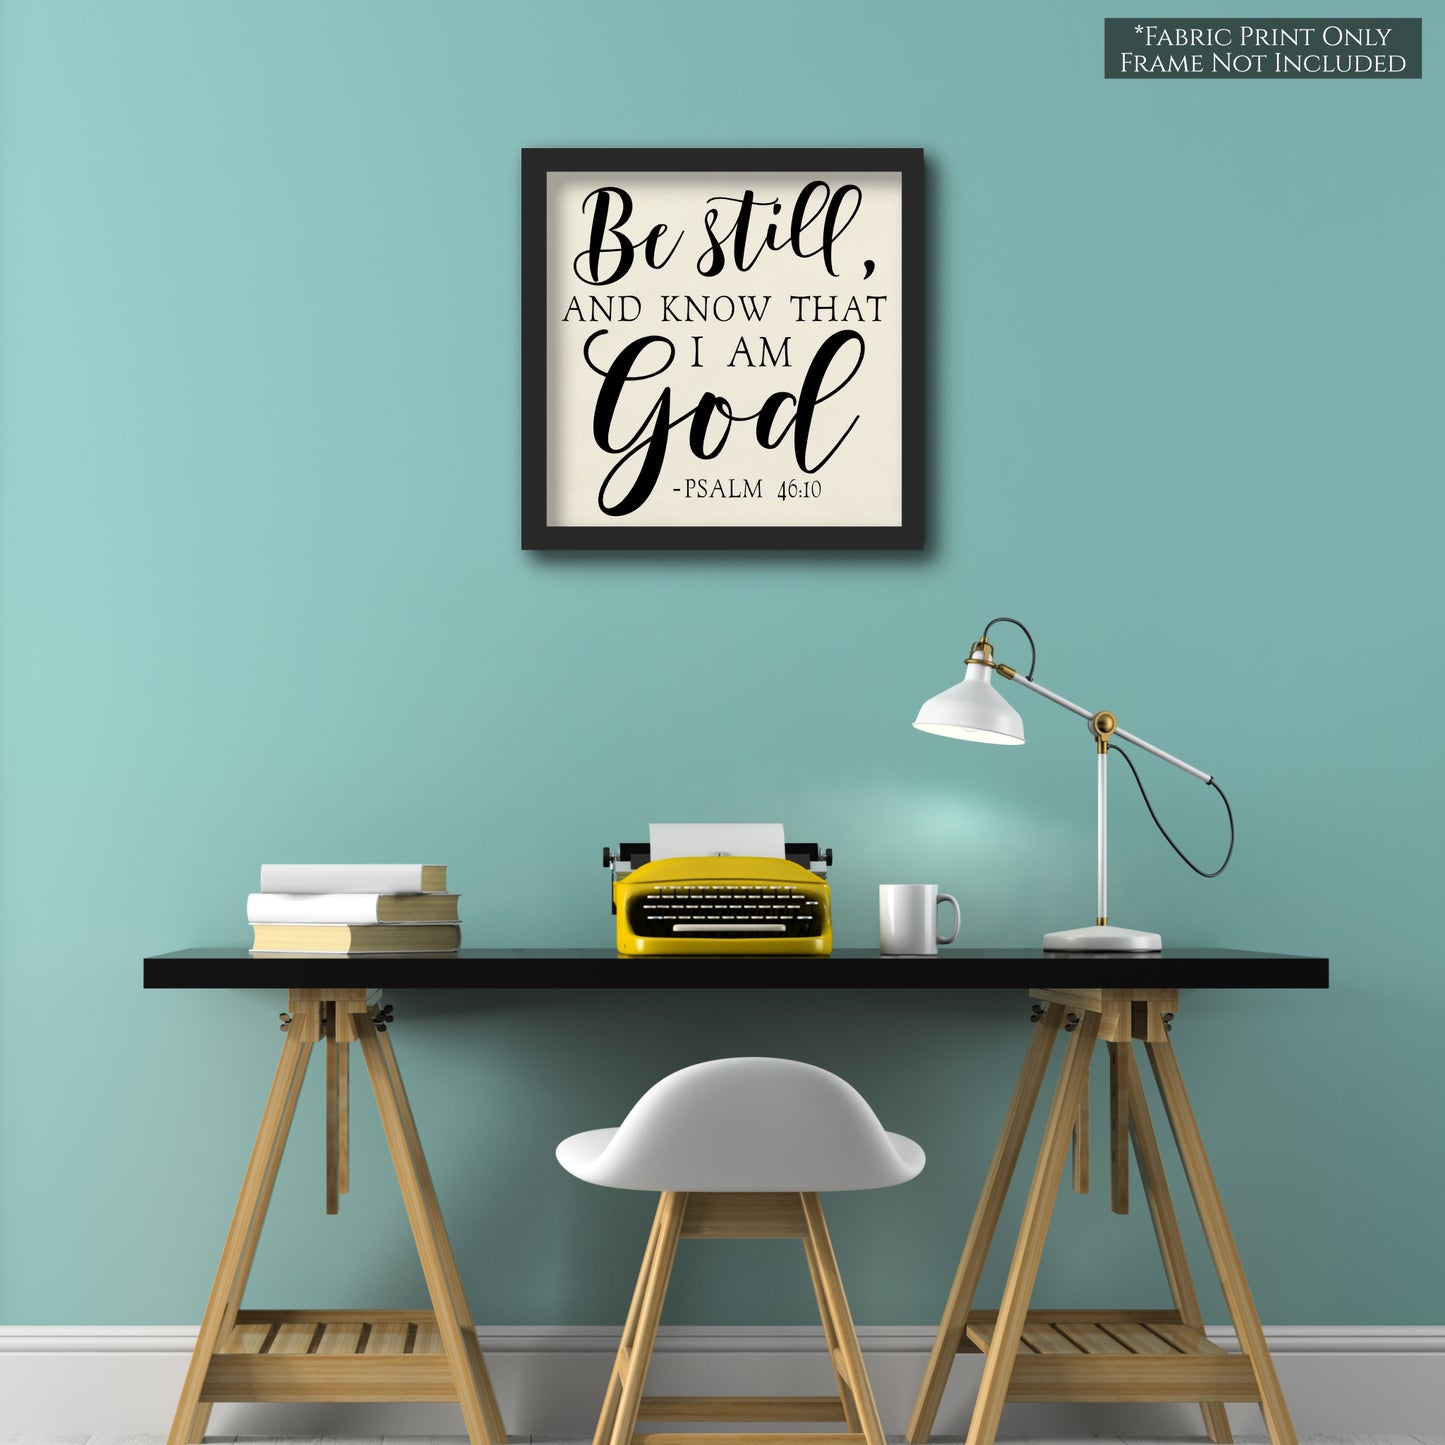 Be still and know that I am God - Psalm 46:10 - Fabric Panel Print, Quilt Block, Large Print Fabric - Wall Art